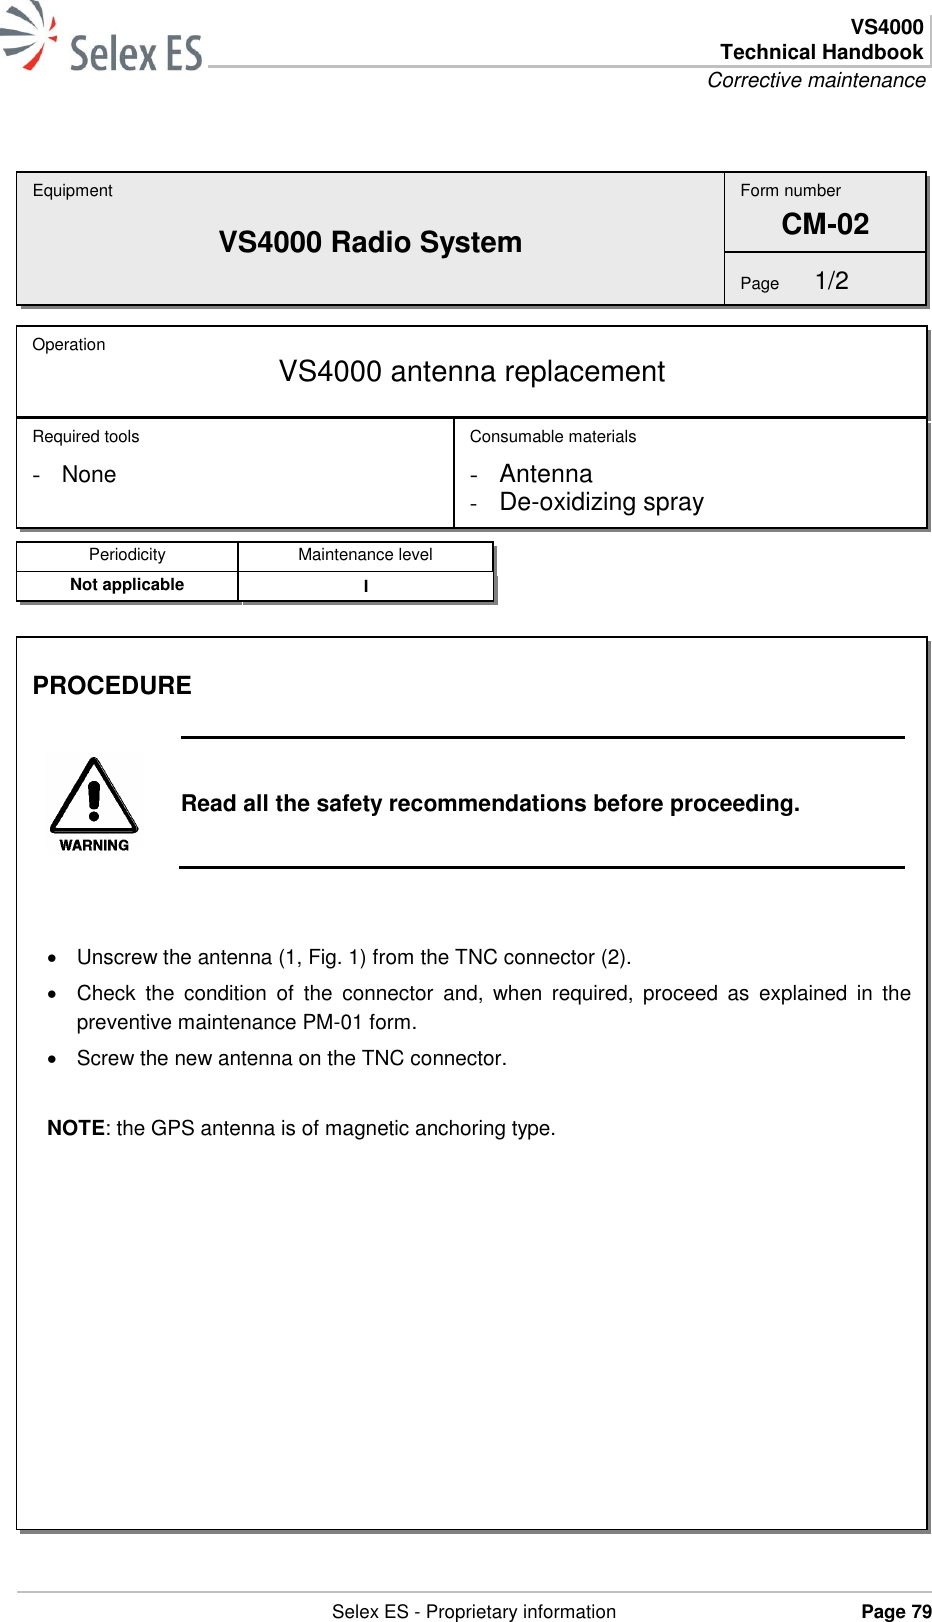  VS4000 Technical Handbook Corrective maintenance   Selex ES - Proprietary information Page 79    Equipment VS4000 Radio System Operation  VS4000 antenna replacement Required tools - None Consumable materials - Antenna - De-oxidizing spray Form number CM-02 Page  1/2 Periodicity Maintenance level Not applicable I PROCEDURE   Read all the safety recommendations before proceeding.     Unscrew the antenna (1, Fig. 1) from the TNC connector (2).   Check  the  condition  of  the  connector  and,  when  required,  proceed  as  explained  in  the preventive maintenance PM-01 form.   Screw the new antenna on the TNC connector.  NOTE: the GPS antenna is of magnetic anchoring type.  